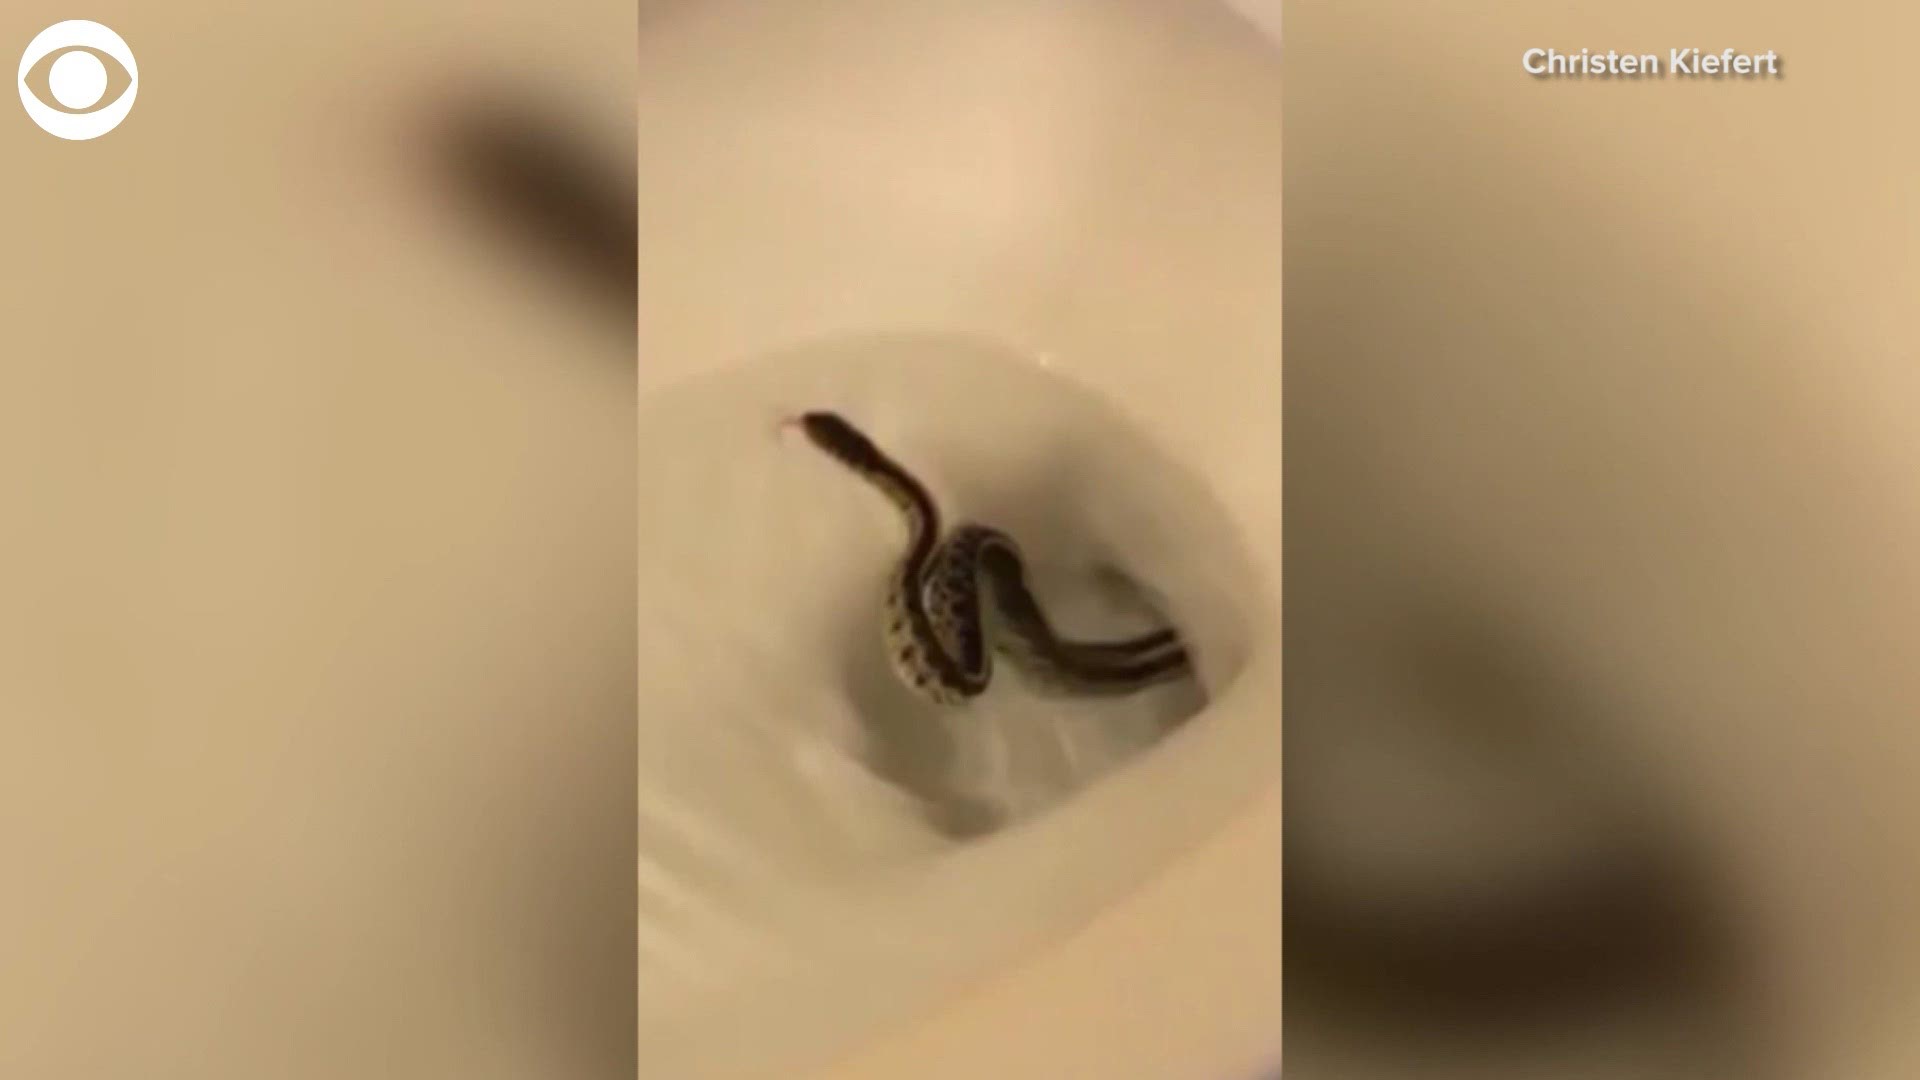 YIKES! What would you do if you saw this snake peeking out of your toilet? That's what happened to Christen Kiefert in Chattanooga, TN!